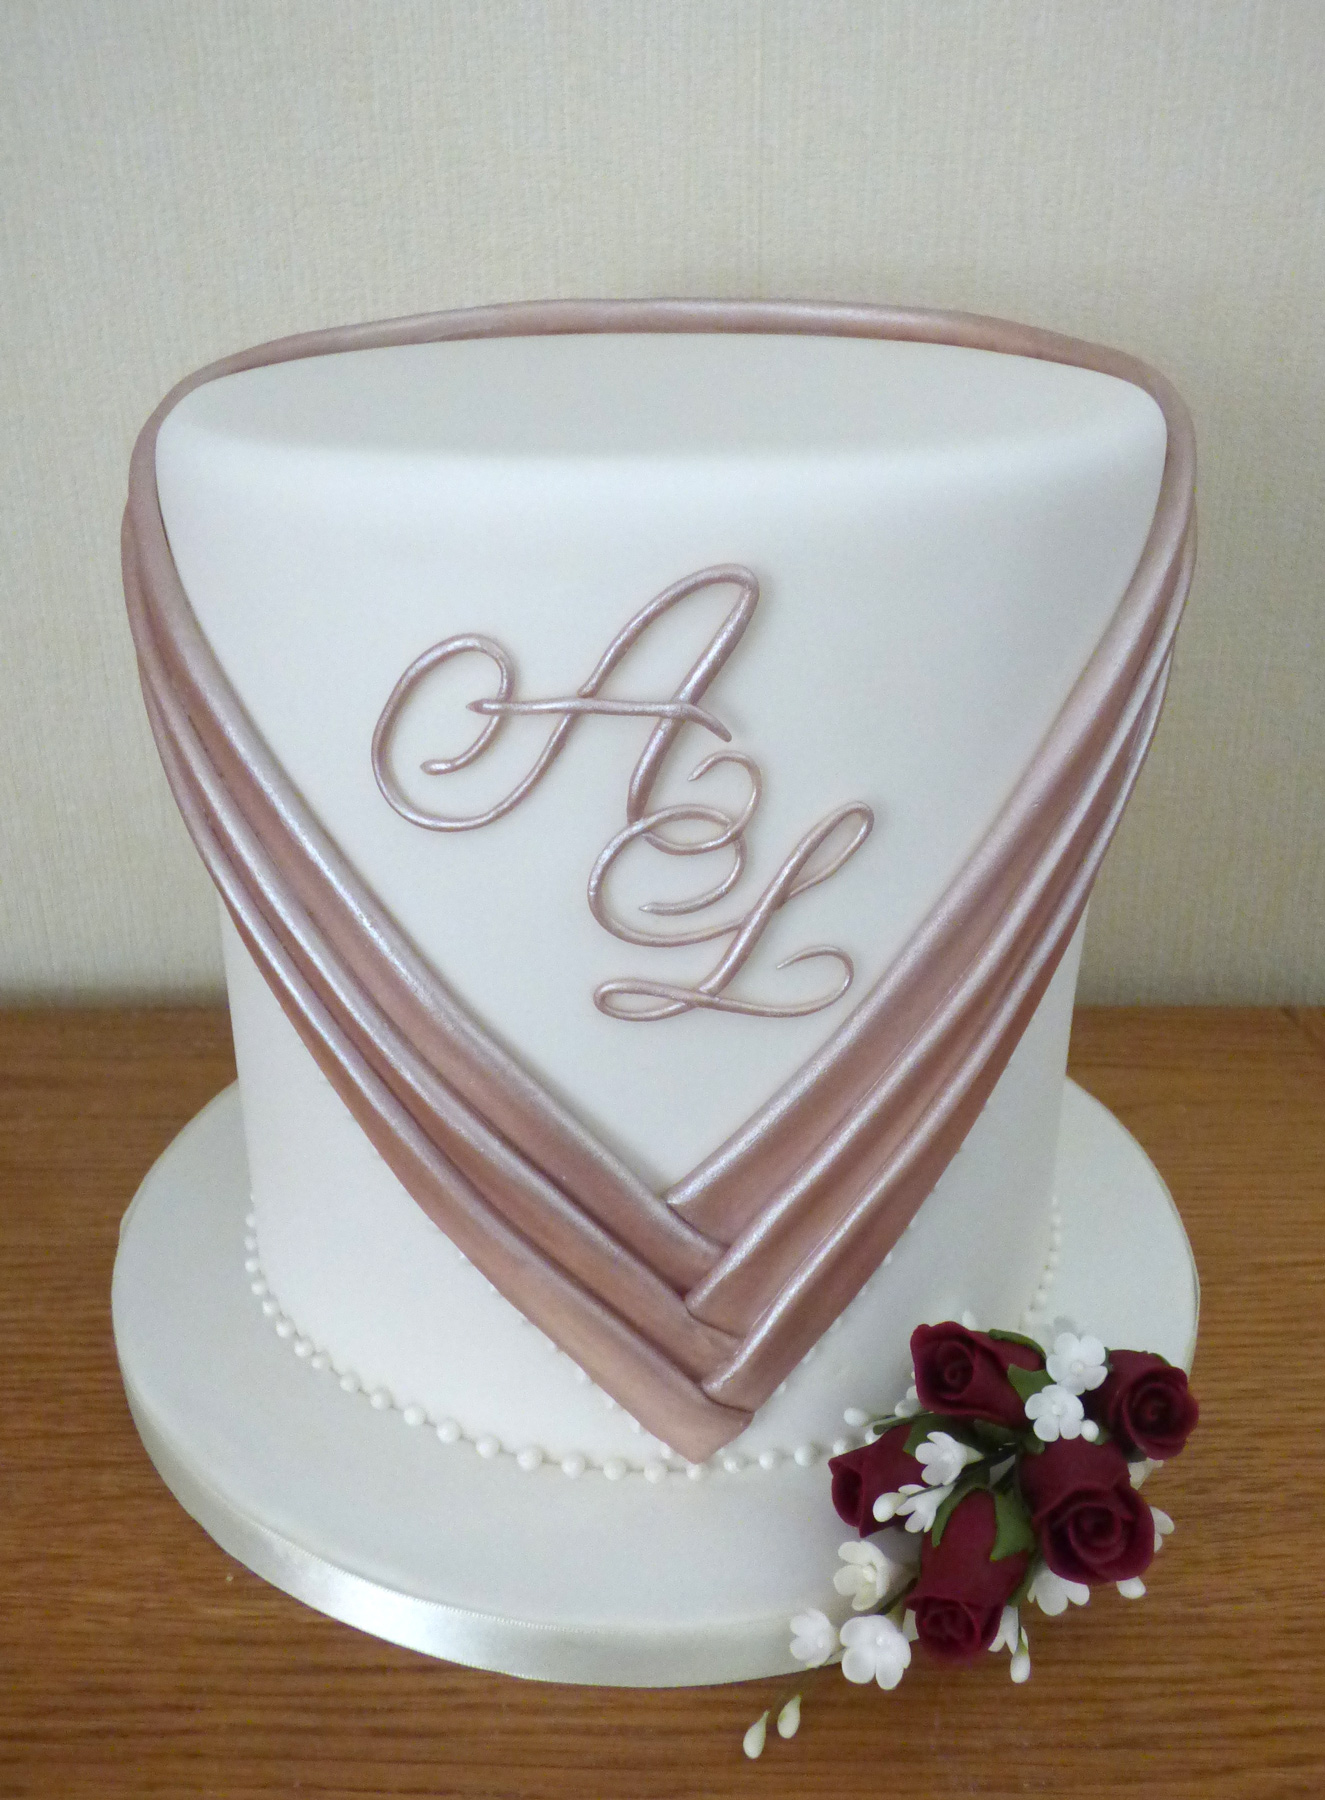 Cake Box Extensions to Add Height to Your Cake Box